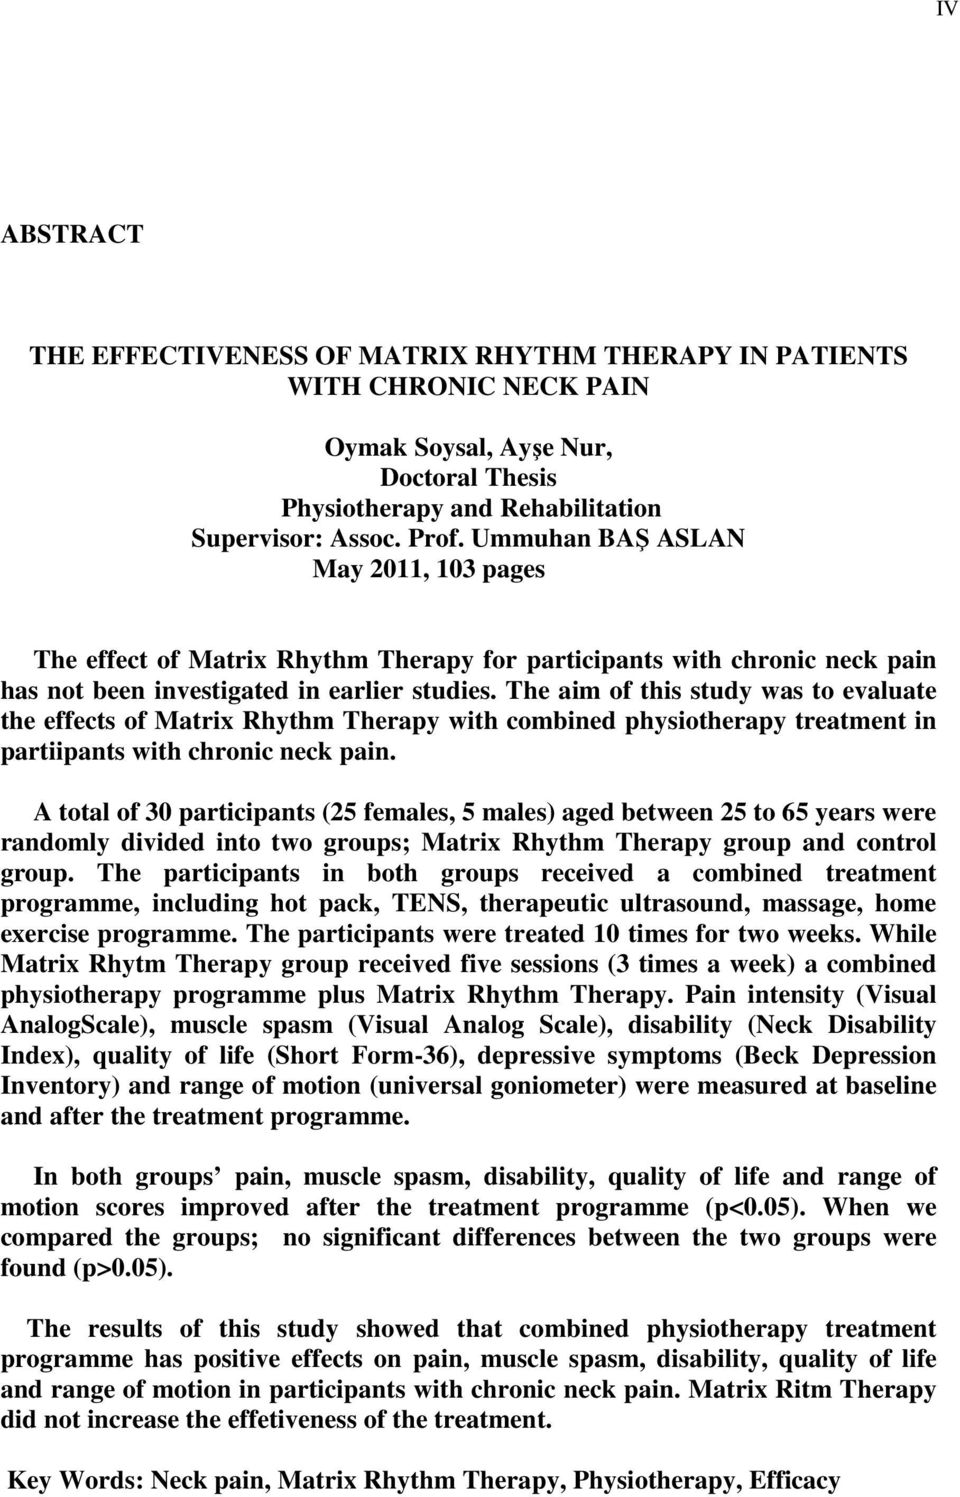 The aim of this study was to evaluate the effects of Matrix Rhythm Therapy with combined physiotherapy treatment in partiipants with chronic neck pain.